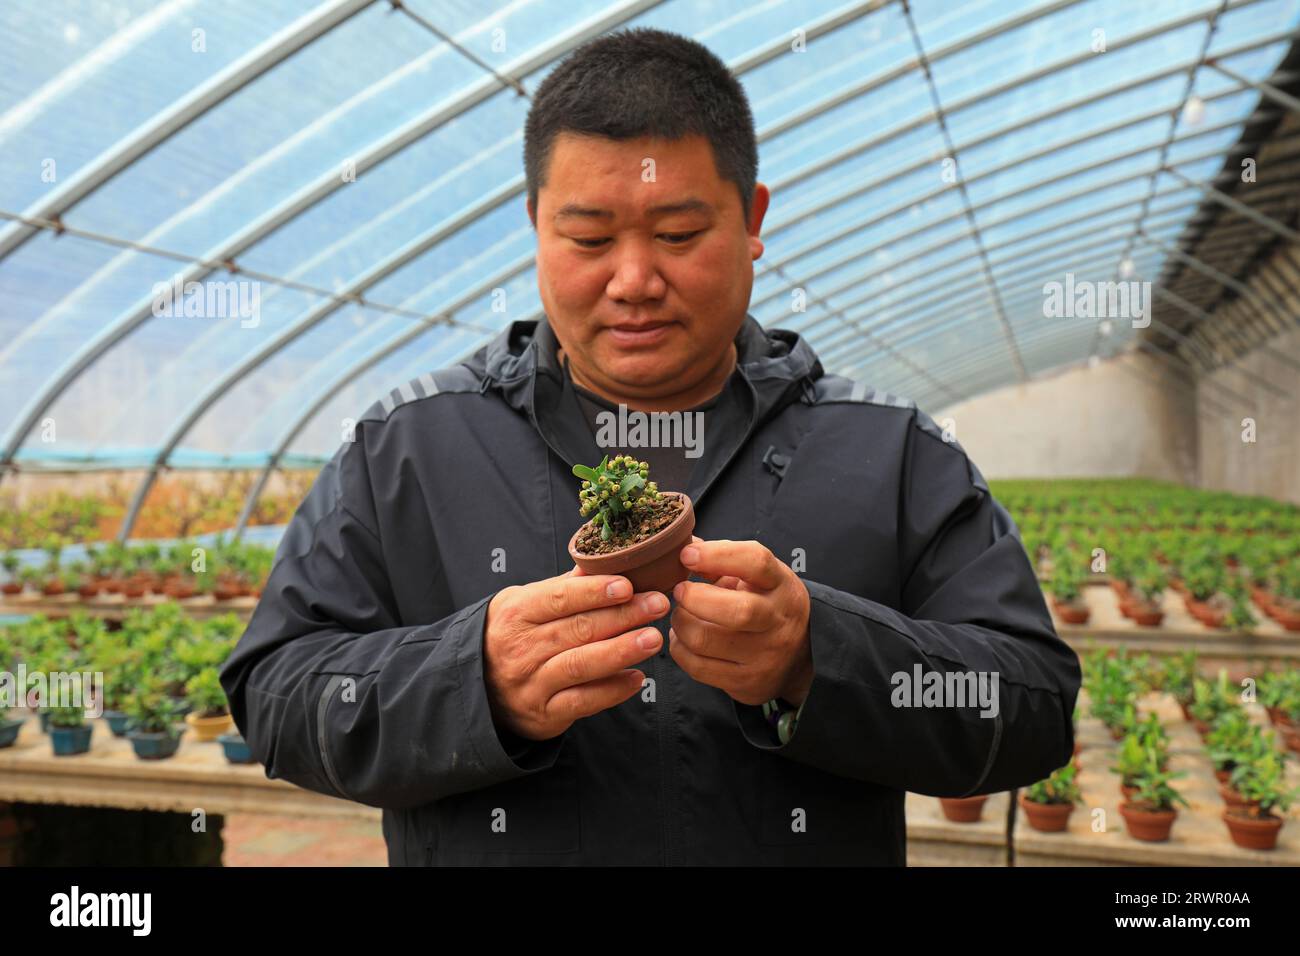 LUANNAN COUNTY, China - May 10, 2022: A gardener is carefully observing the growth and development of Pyracantha bonsai in a nursery, North China Stock Photo